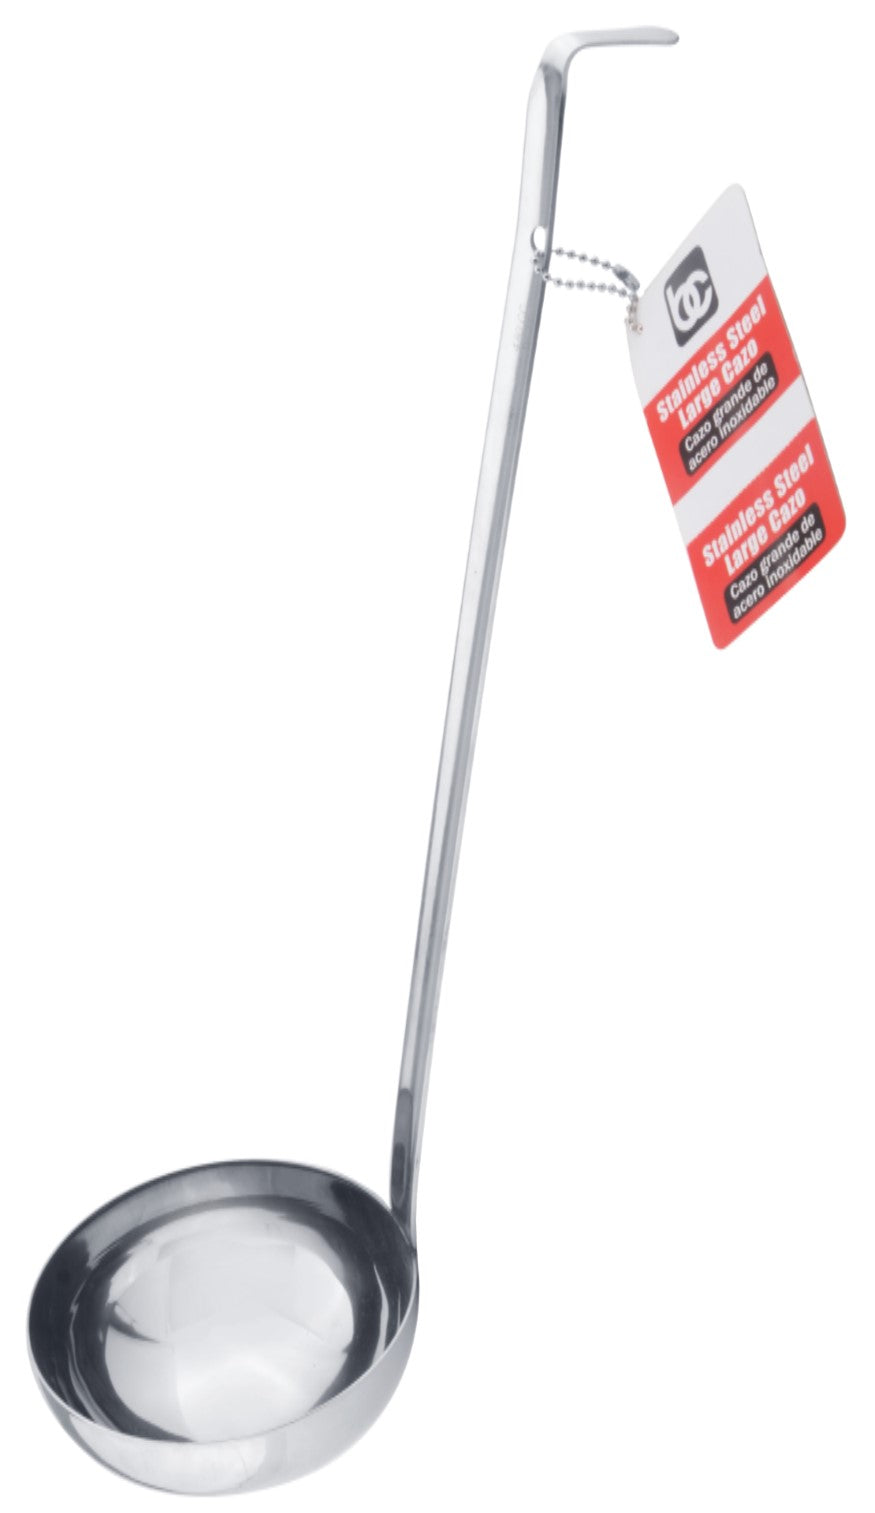 Bene Casa 16oz stainless-steel ladle, commercial quality, dishwasher safe